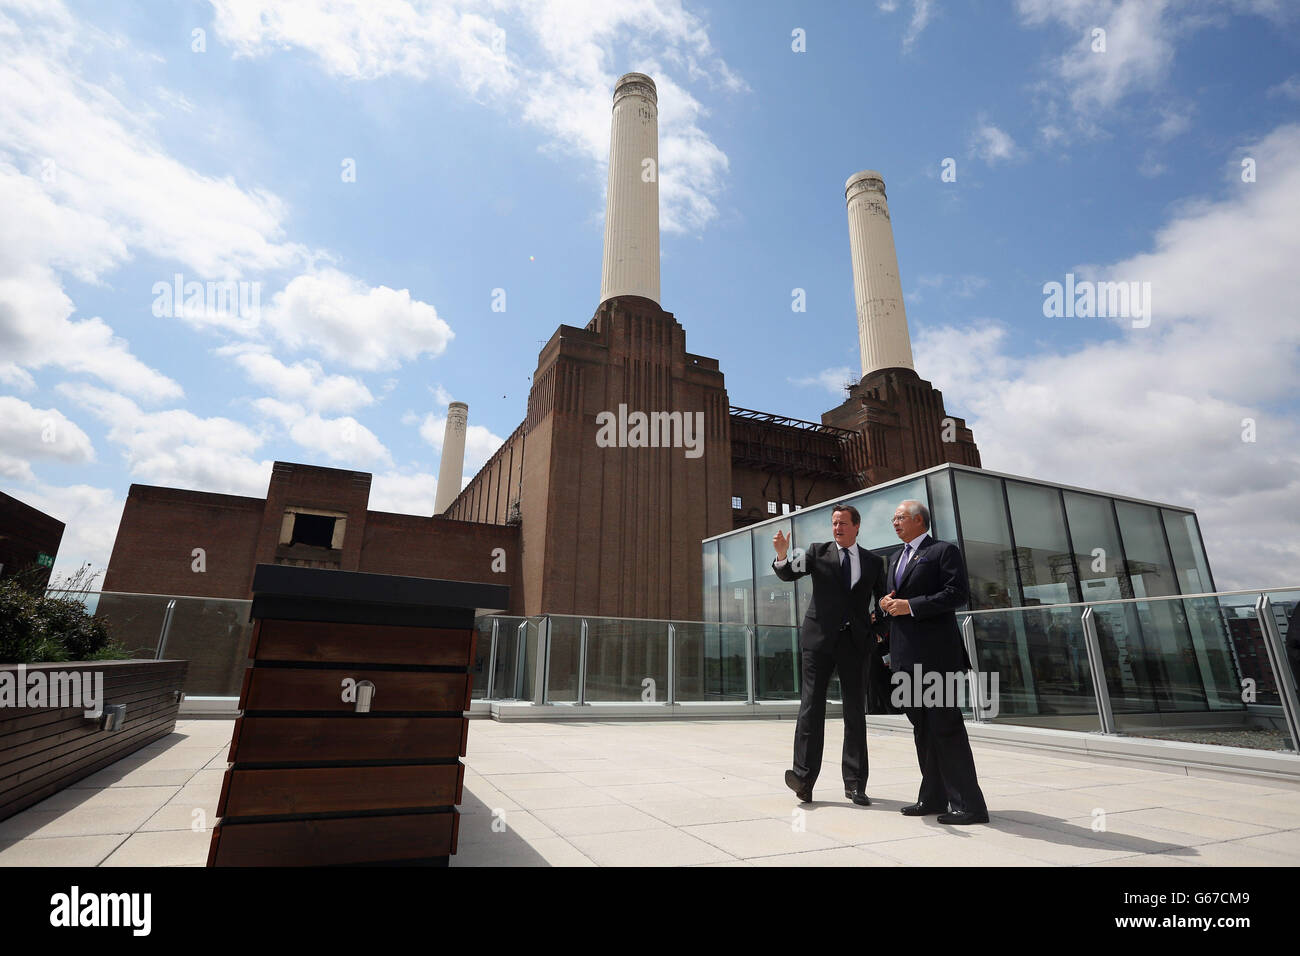 Prime Minister David Cameron holds a bilateral meeting with Najib Razak (right), the Prime Minister of Malaysia, at Battersea Power Station in London. Cameron said it was 'about time' as he hailed the start of an &Acirc;&pound;8 billion redevelopment of Battersea Power Station. Stock Photo